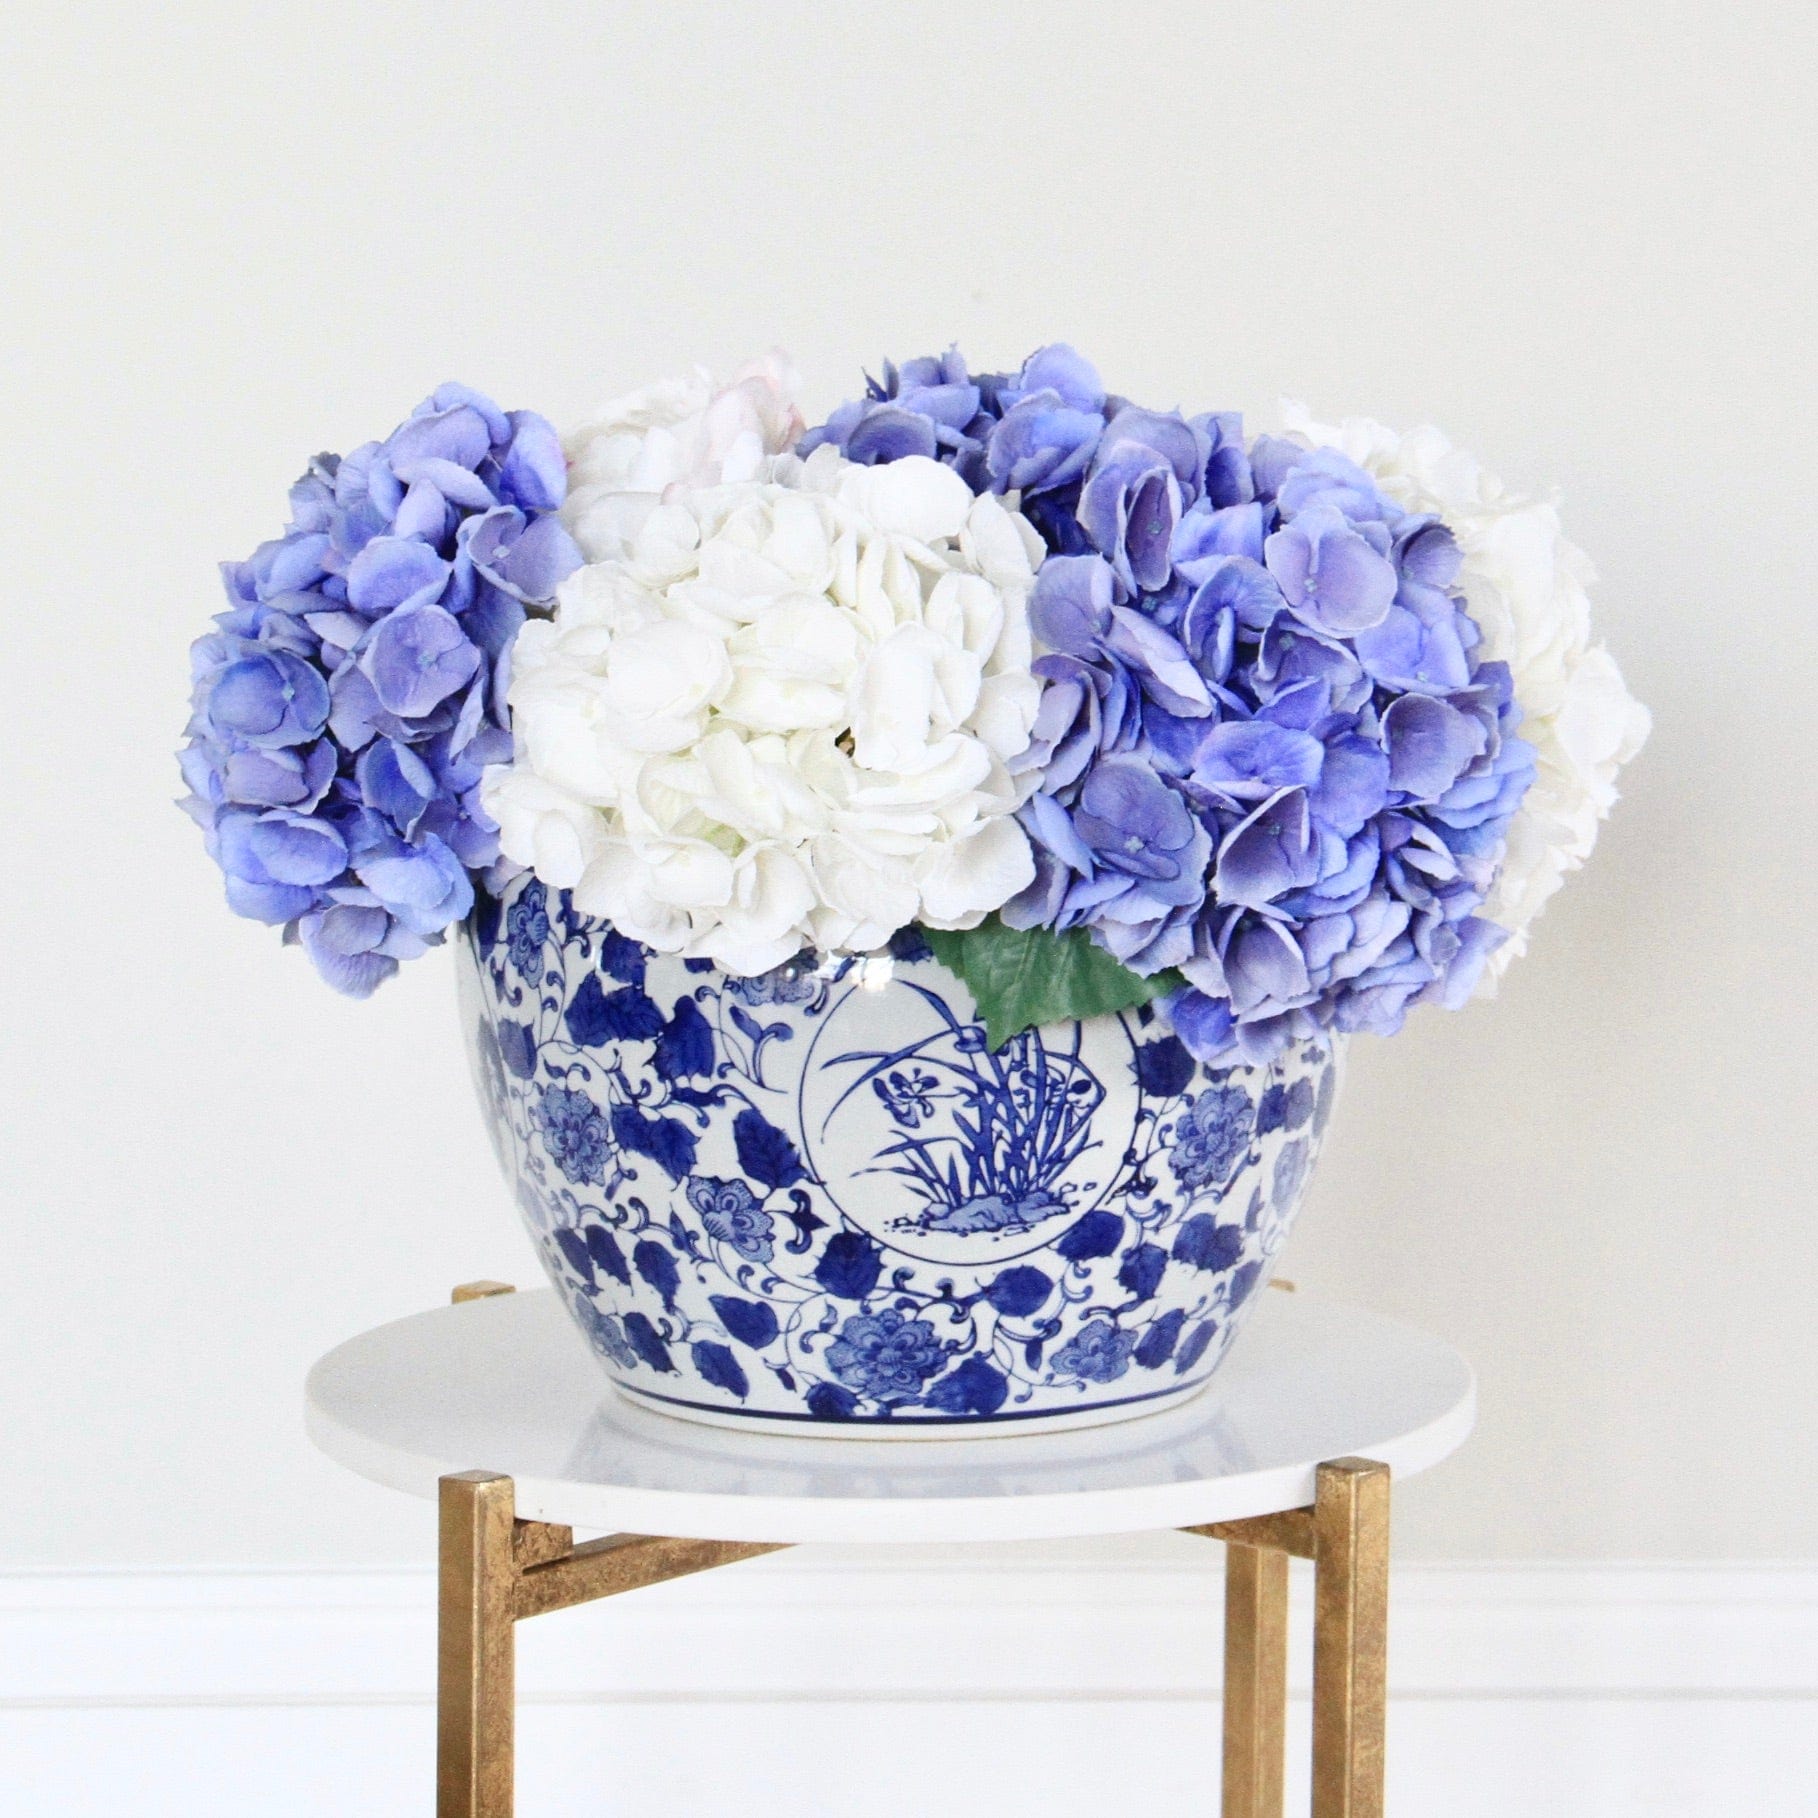 Artificial Flowers in Vase Stylish Vases Blue & White Floral Planter Home Decor and Accessories Amaranthine Blooms UK